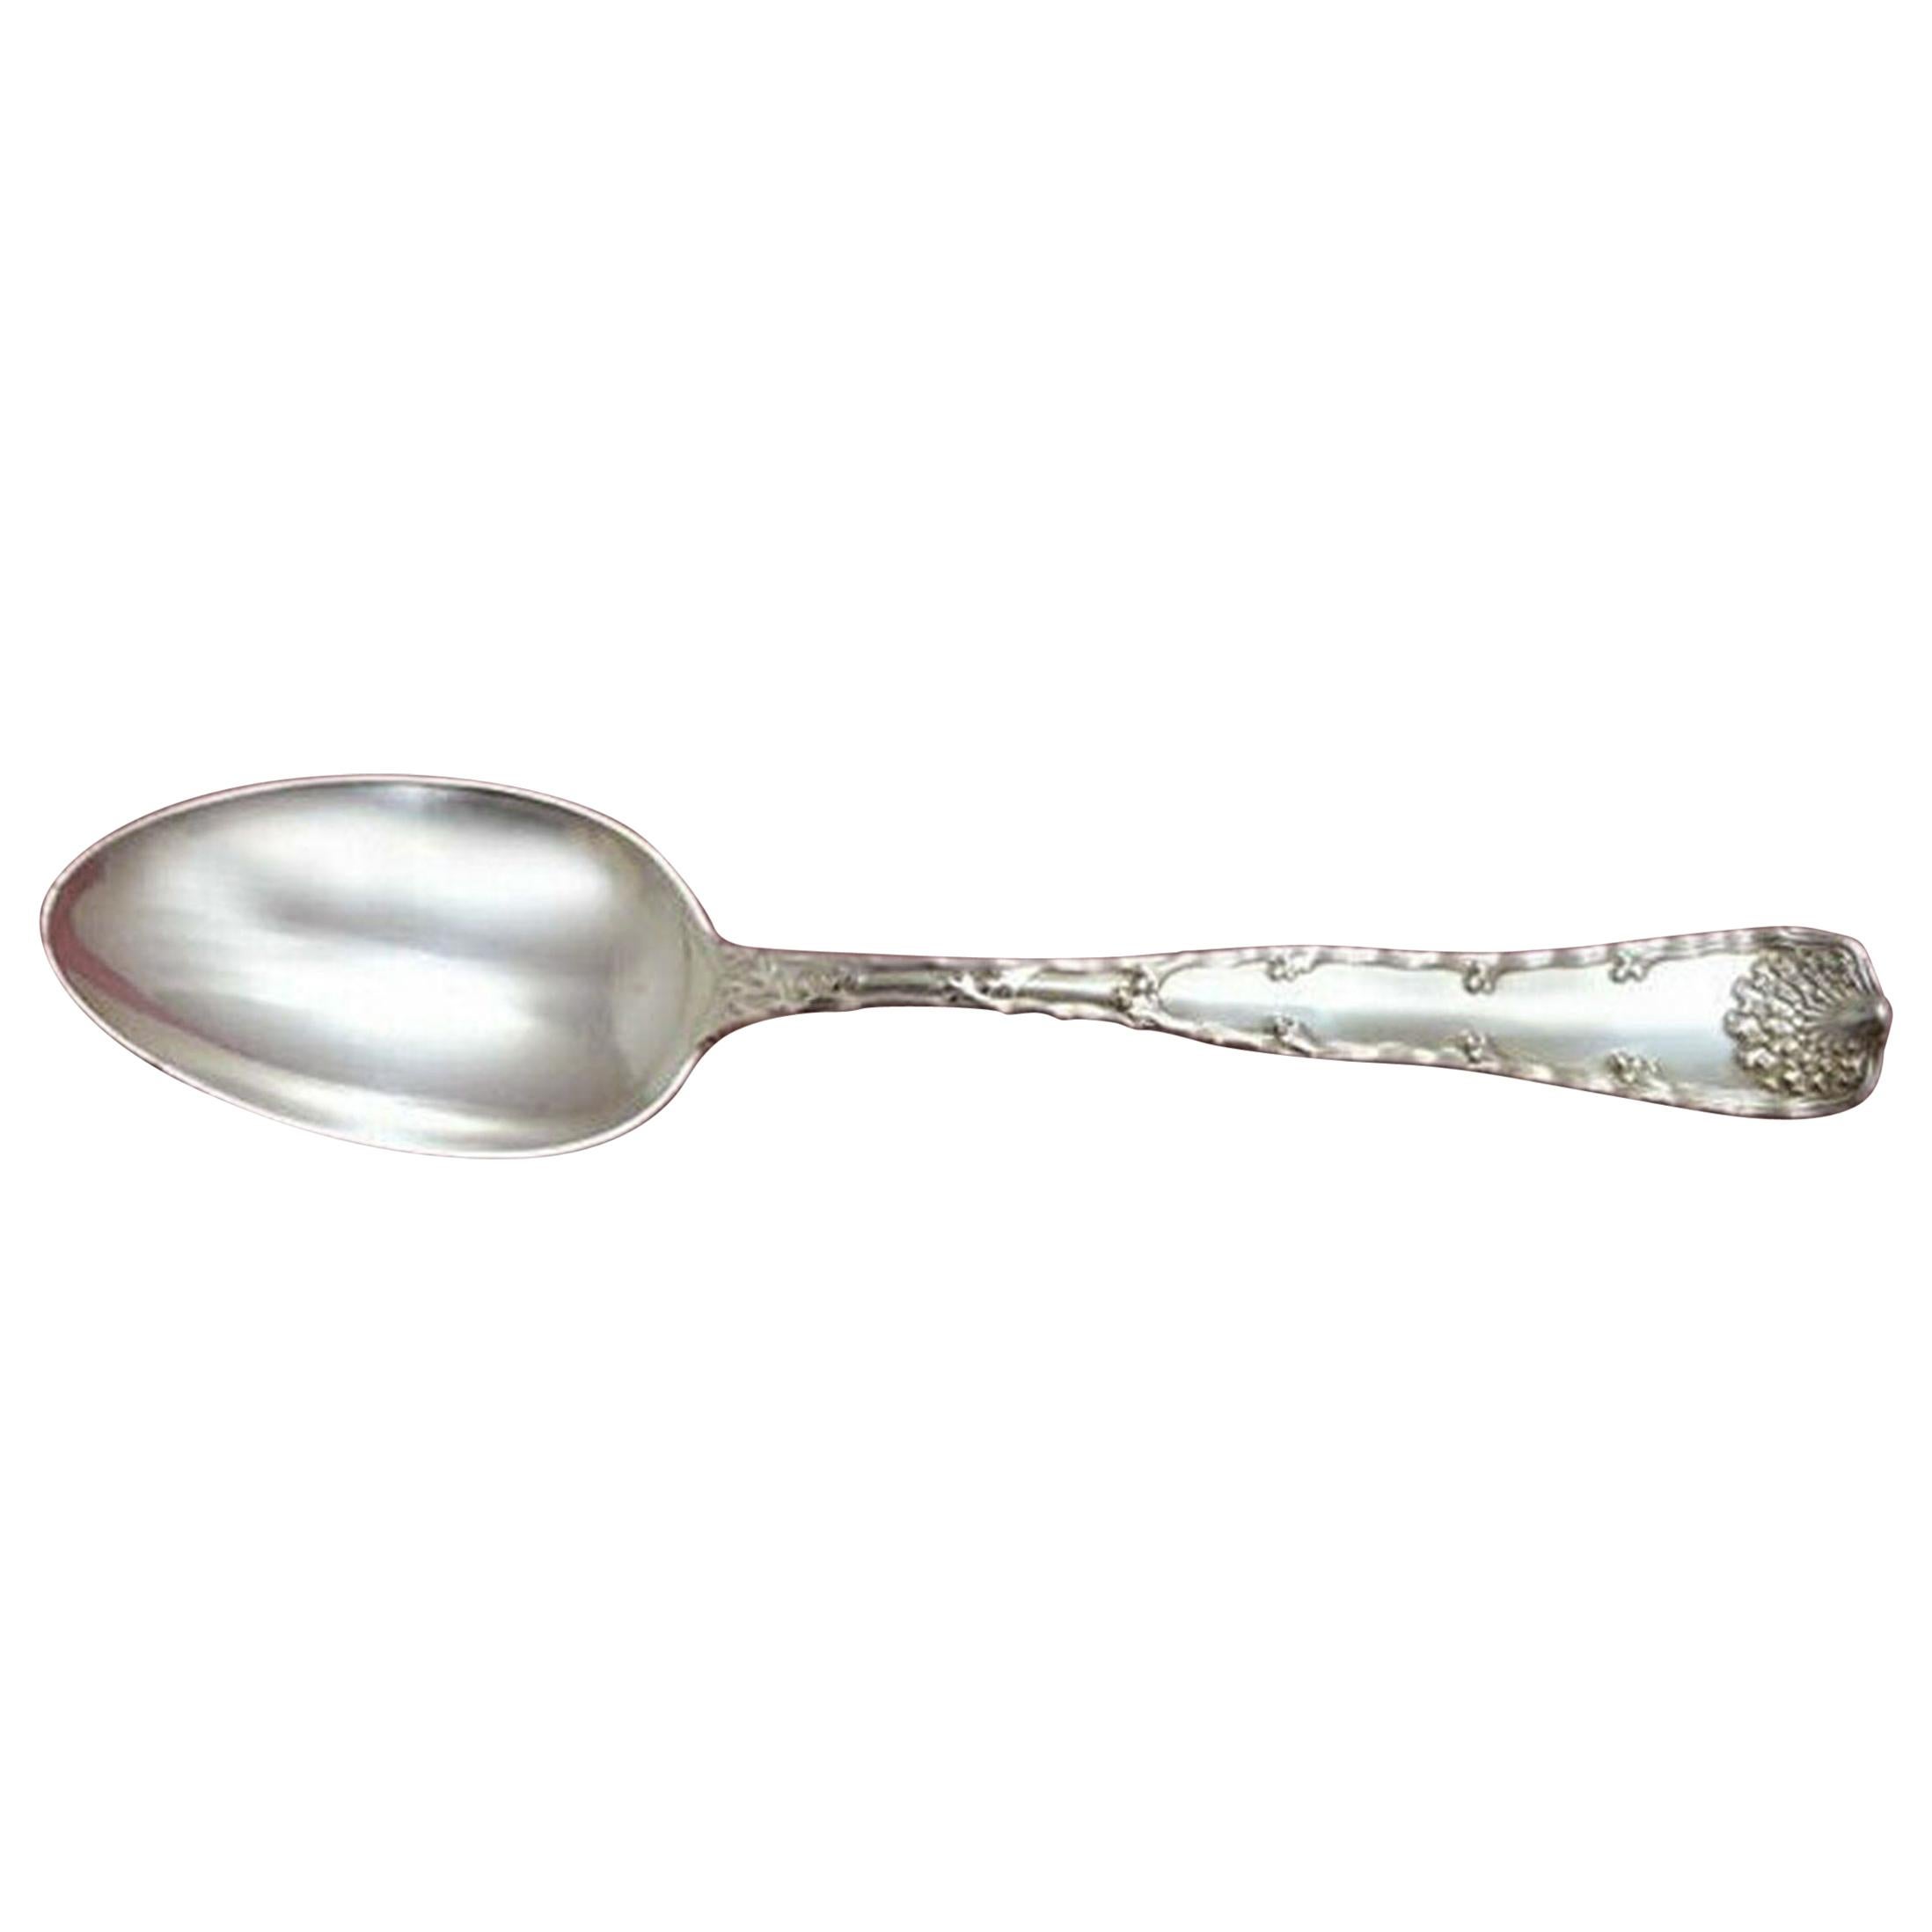 Wave Edge by Tiffany & Co. Sterling Silver Serving Spoon